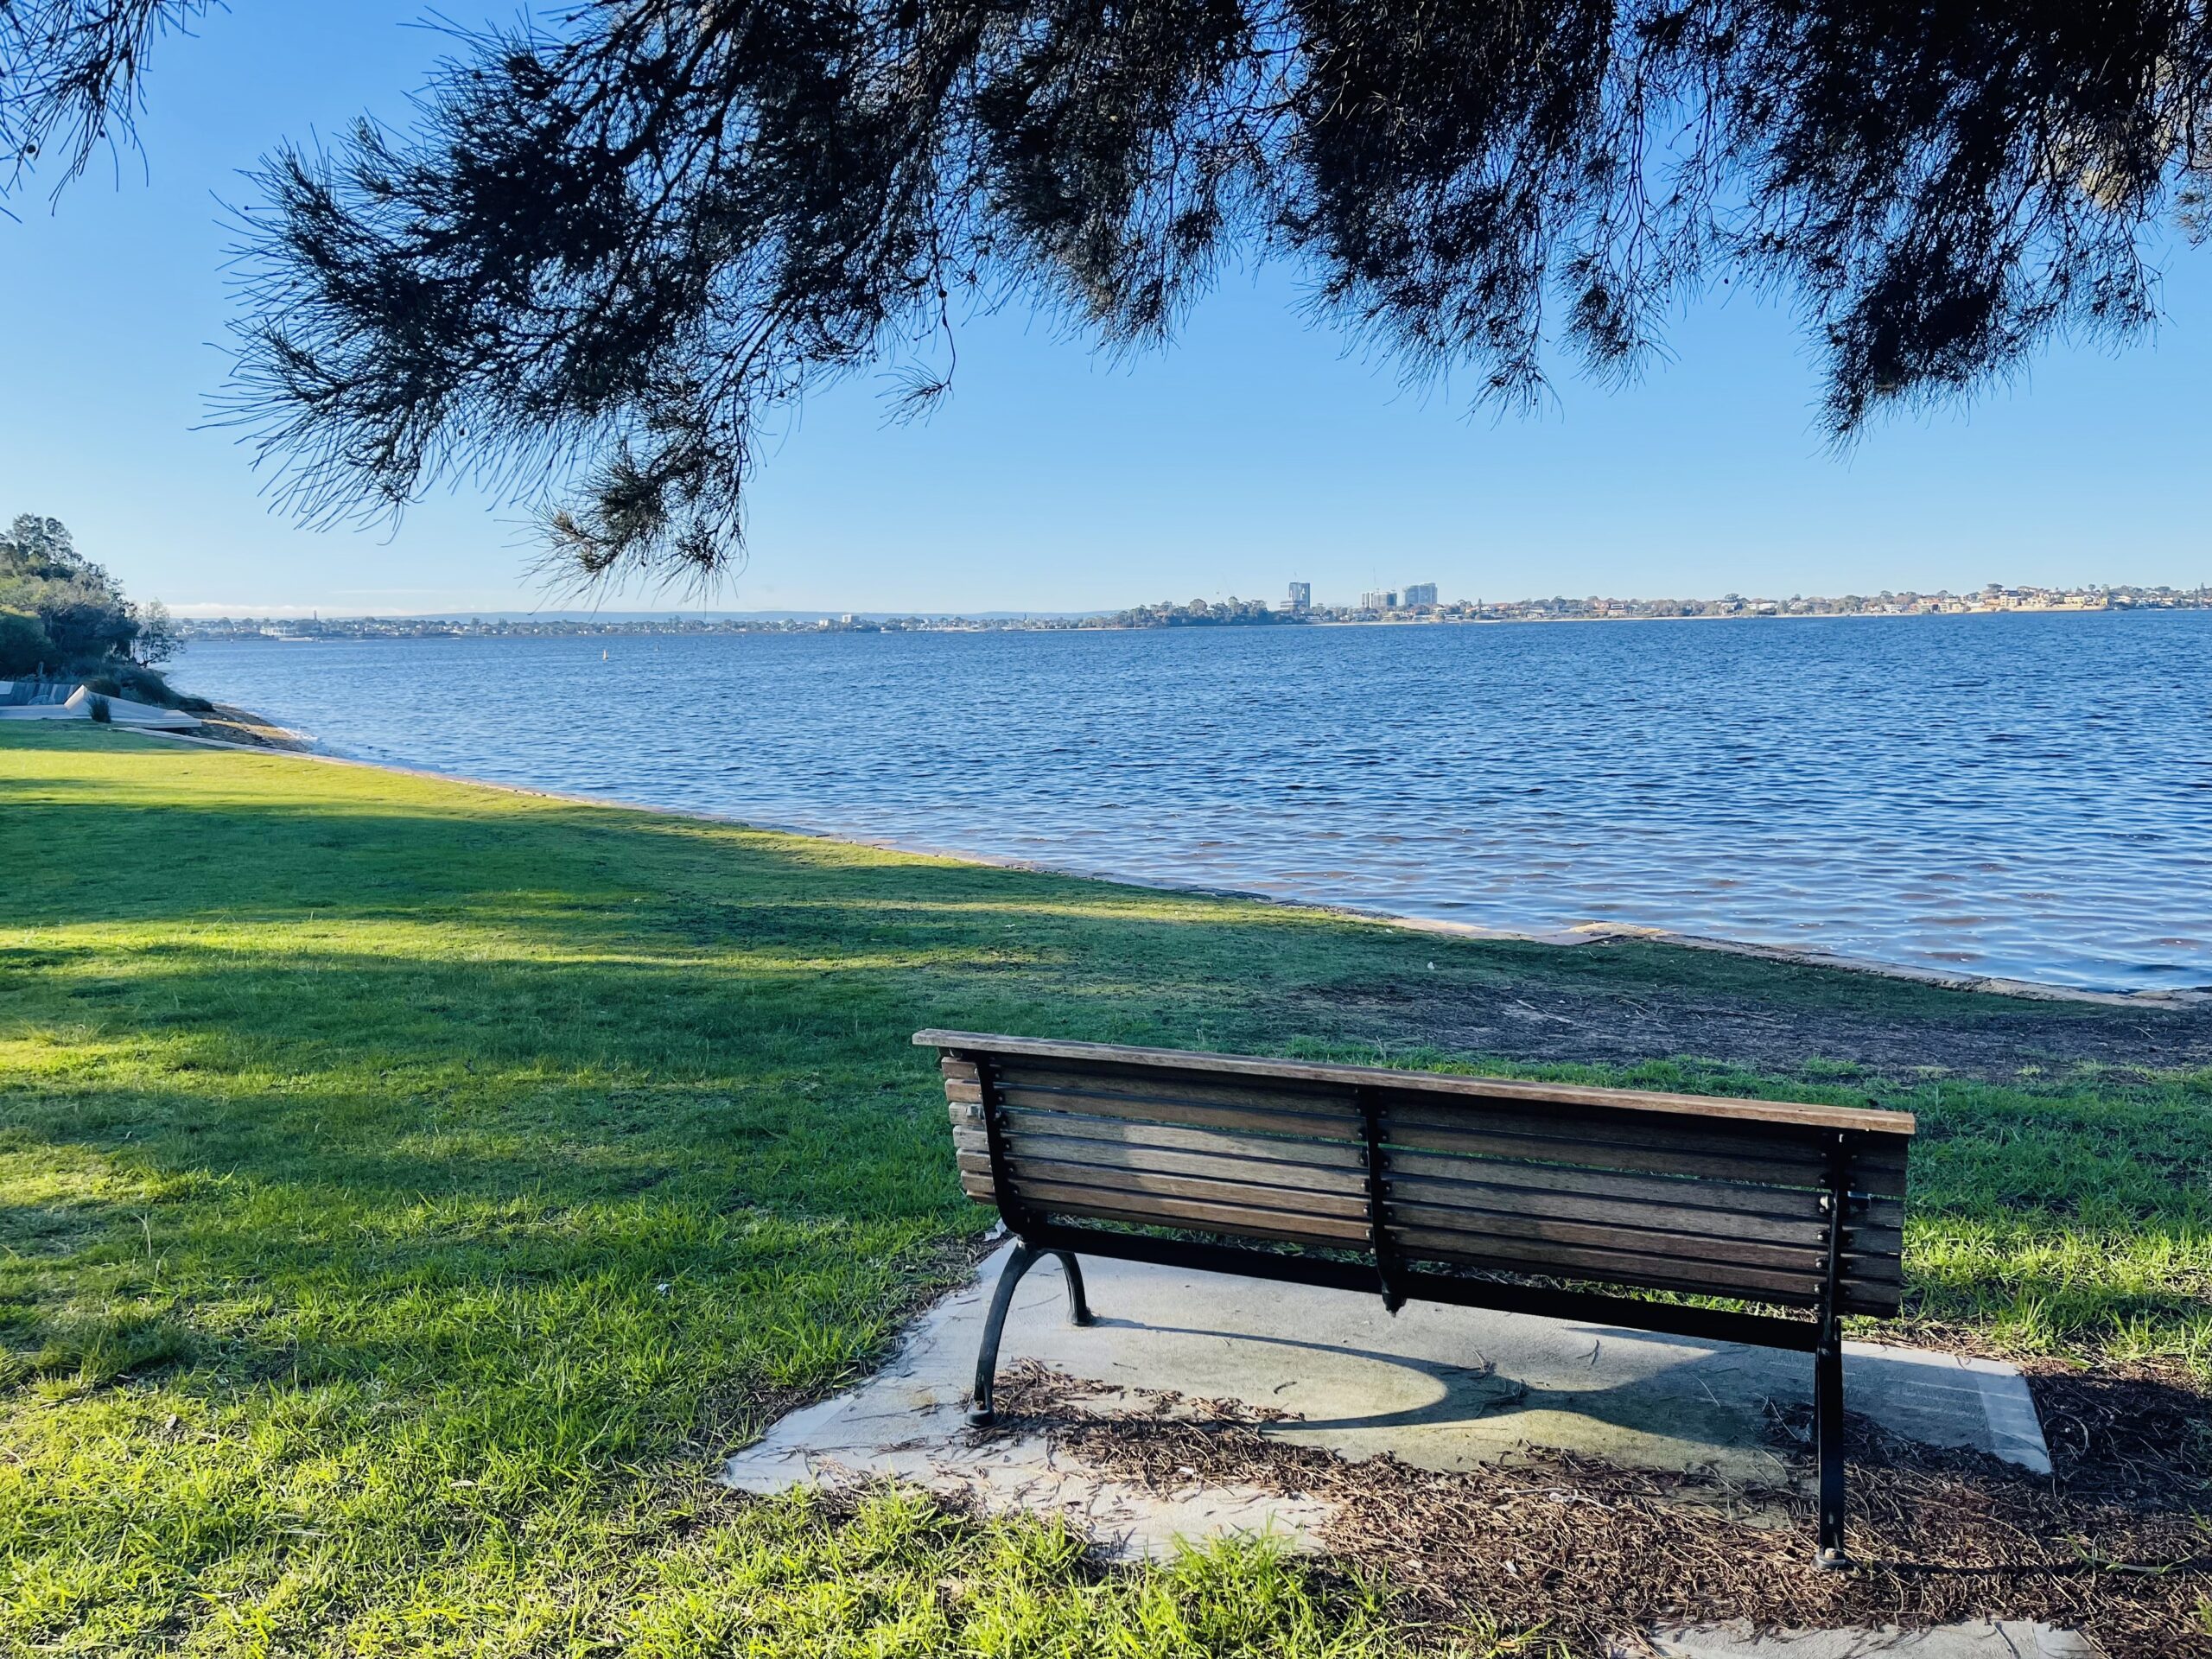 A photo of a park bench at Matilda Bay reserve. The bench is made of timber and steel, and sits on an open area of green grass on the bank of the Swan River. The river water is a bright blue, as is the sky above. The canopy of a tree can be seen in the top half of the photo, and shades the bench below.